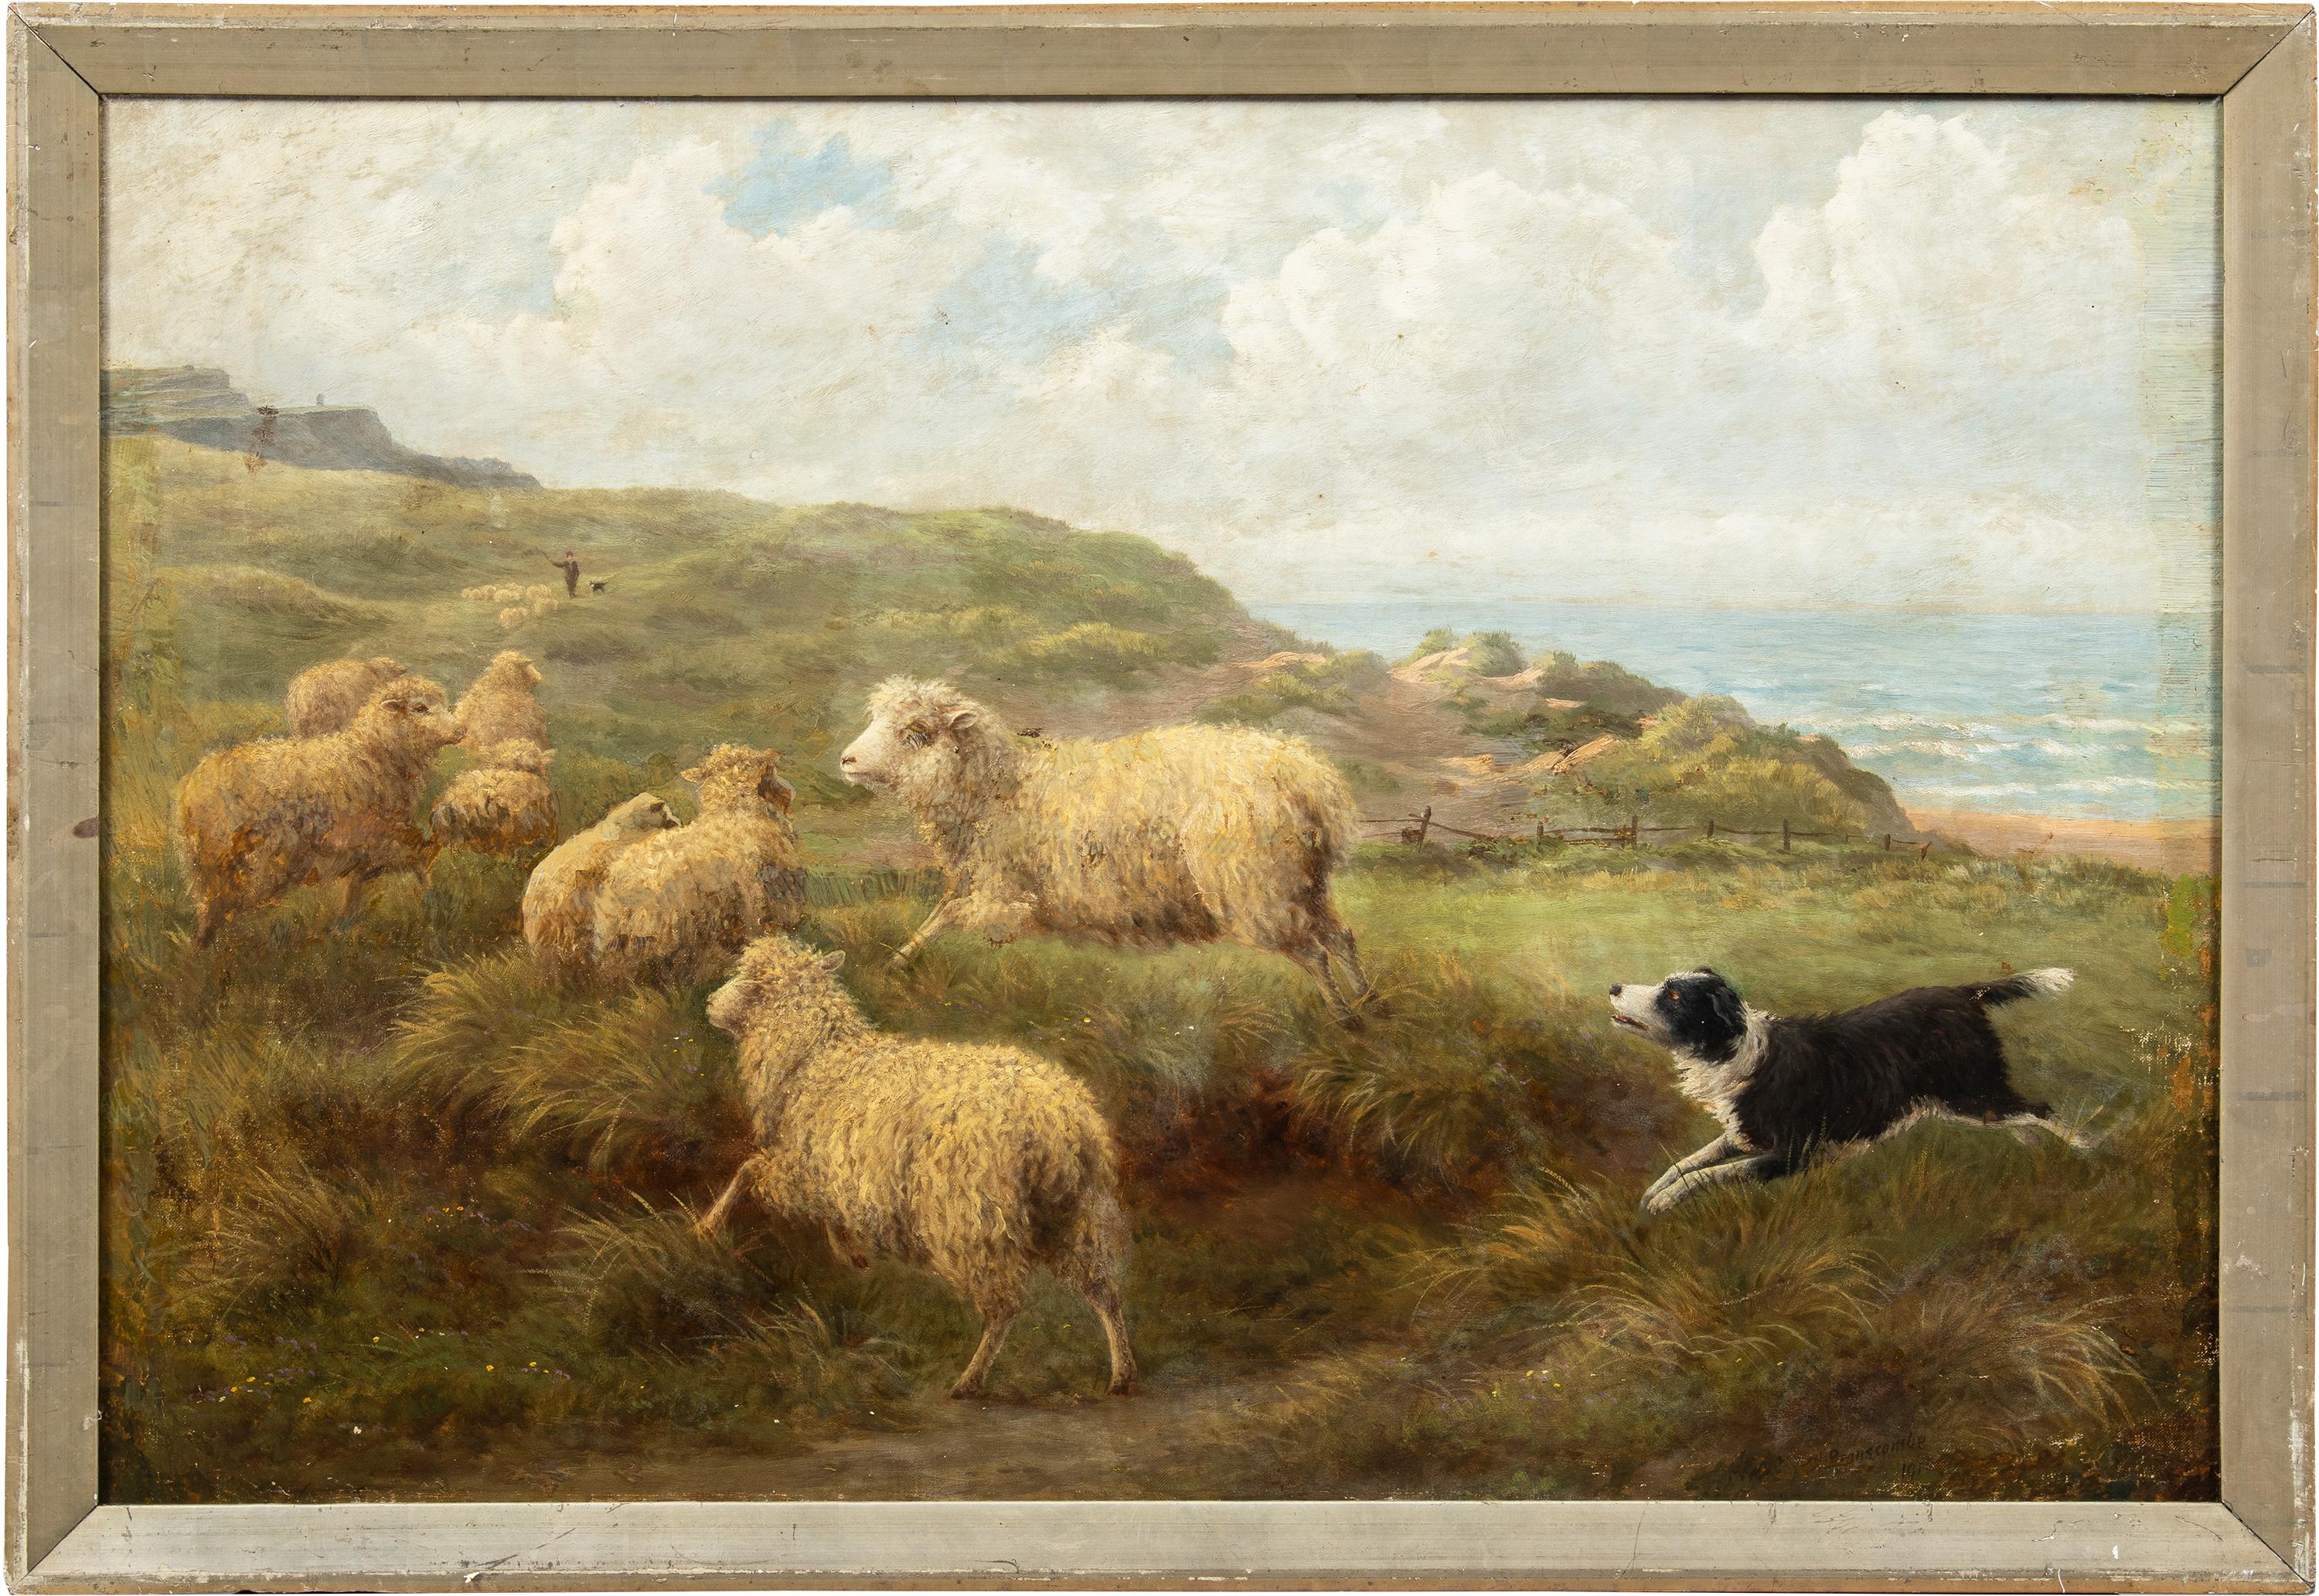 Charles H. Branscombe Animal Painting - Charles Branscombe (British) - Early 20th century painting - Dog Sheeps - Signed